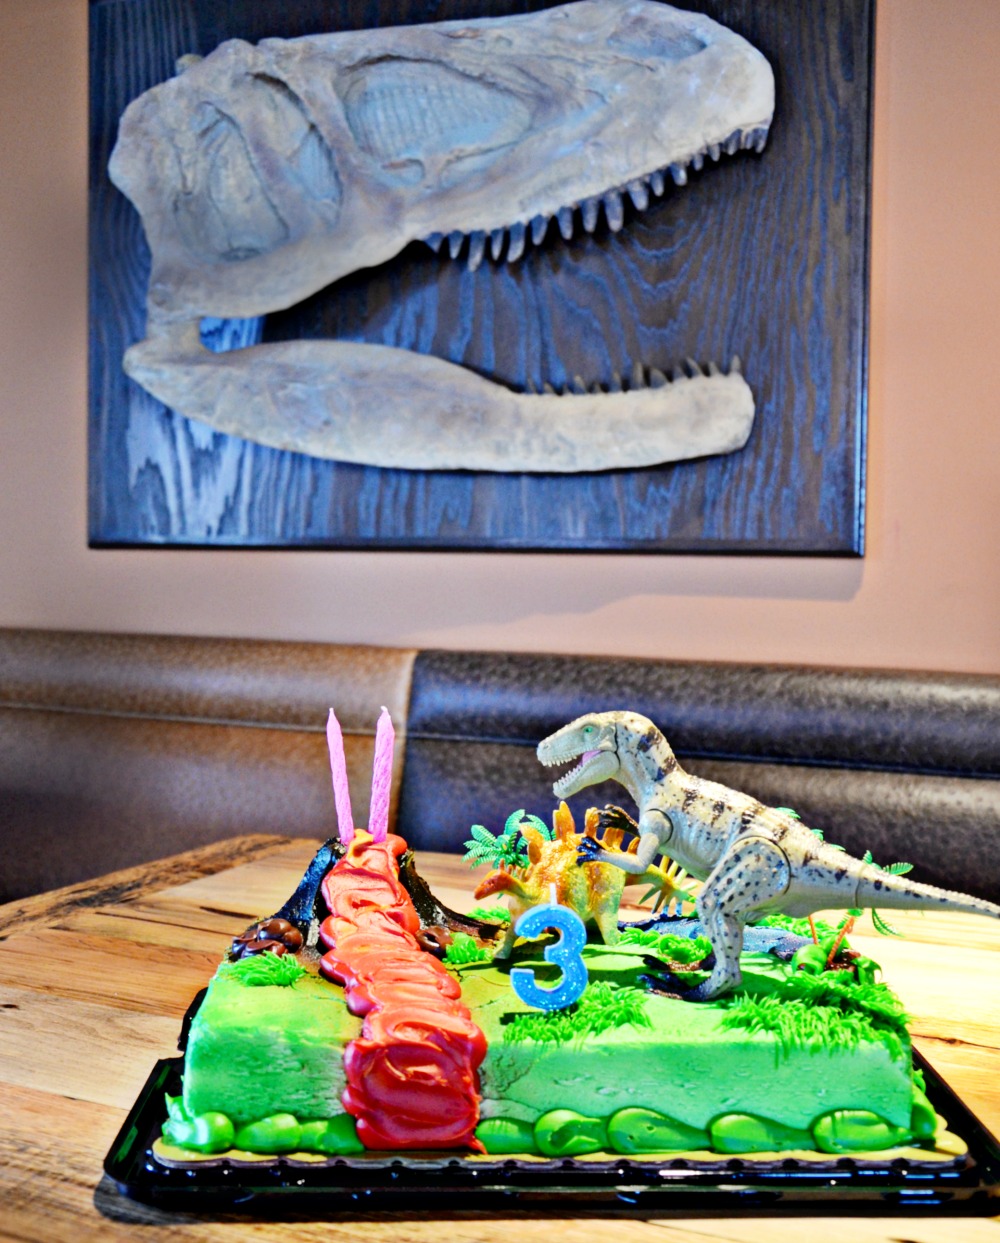 Host the ultimate dinosaur party at Pangaea Land of the Dinosaurs in Scottsdale, Arizona. Bring a dinosaur cake to celebrate with friends.